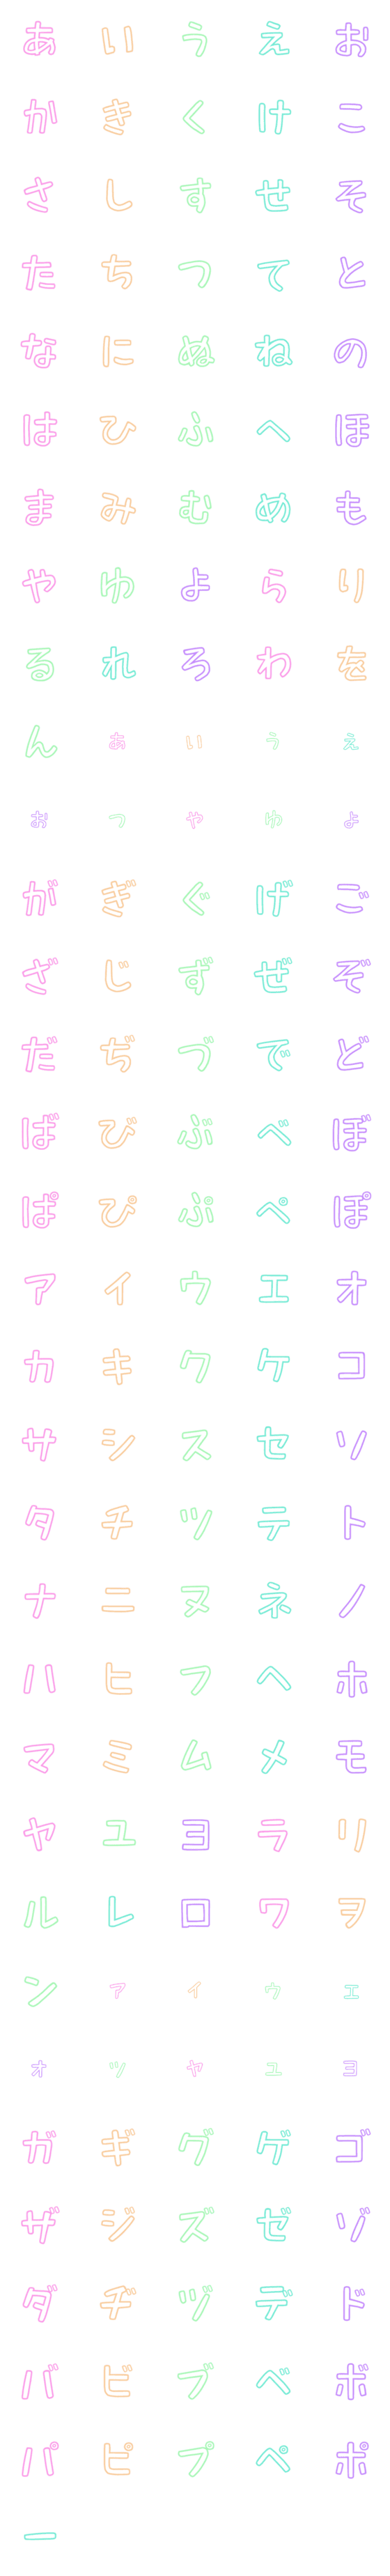 [LINE絵文字]マカロン デコ文字の画像一覧